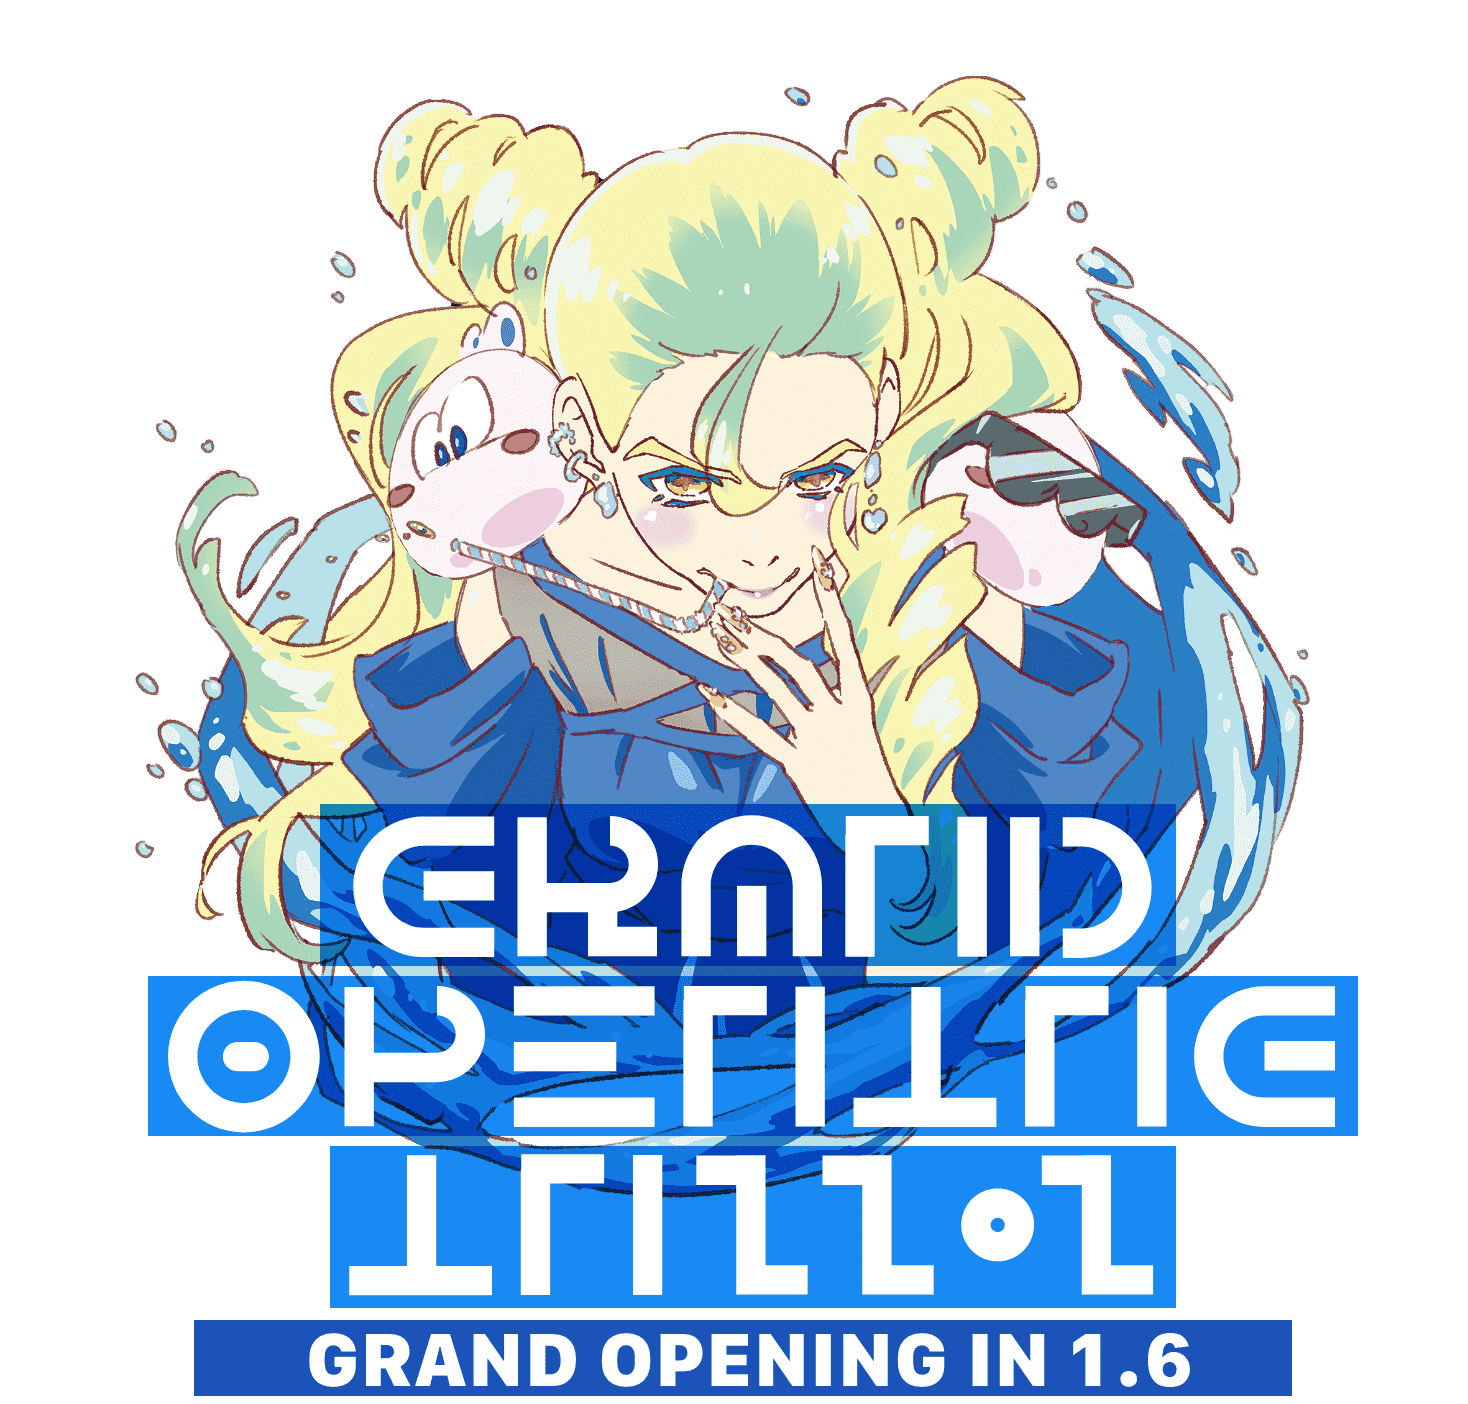 grand opening in 11.1